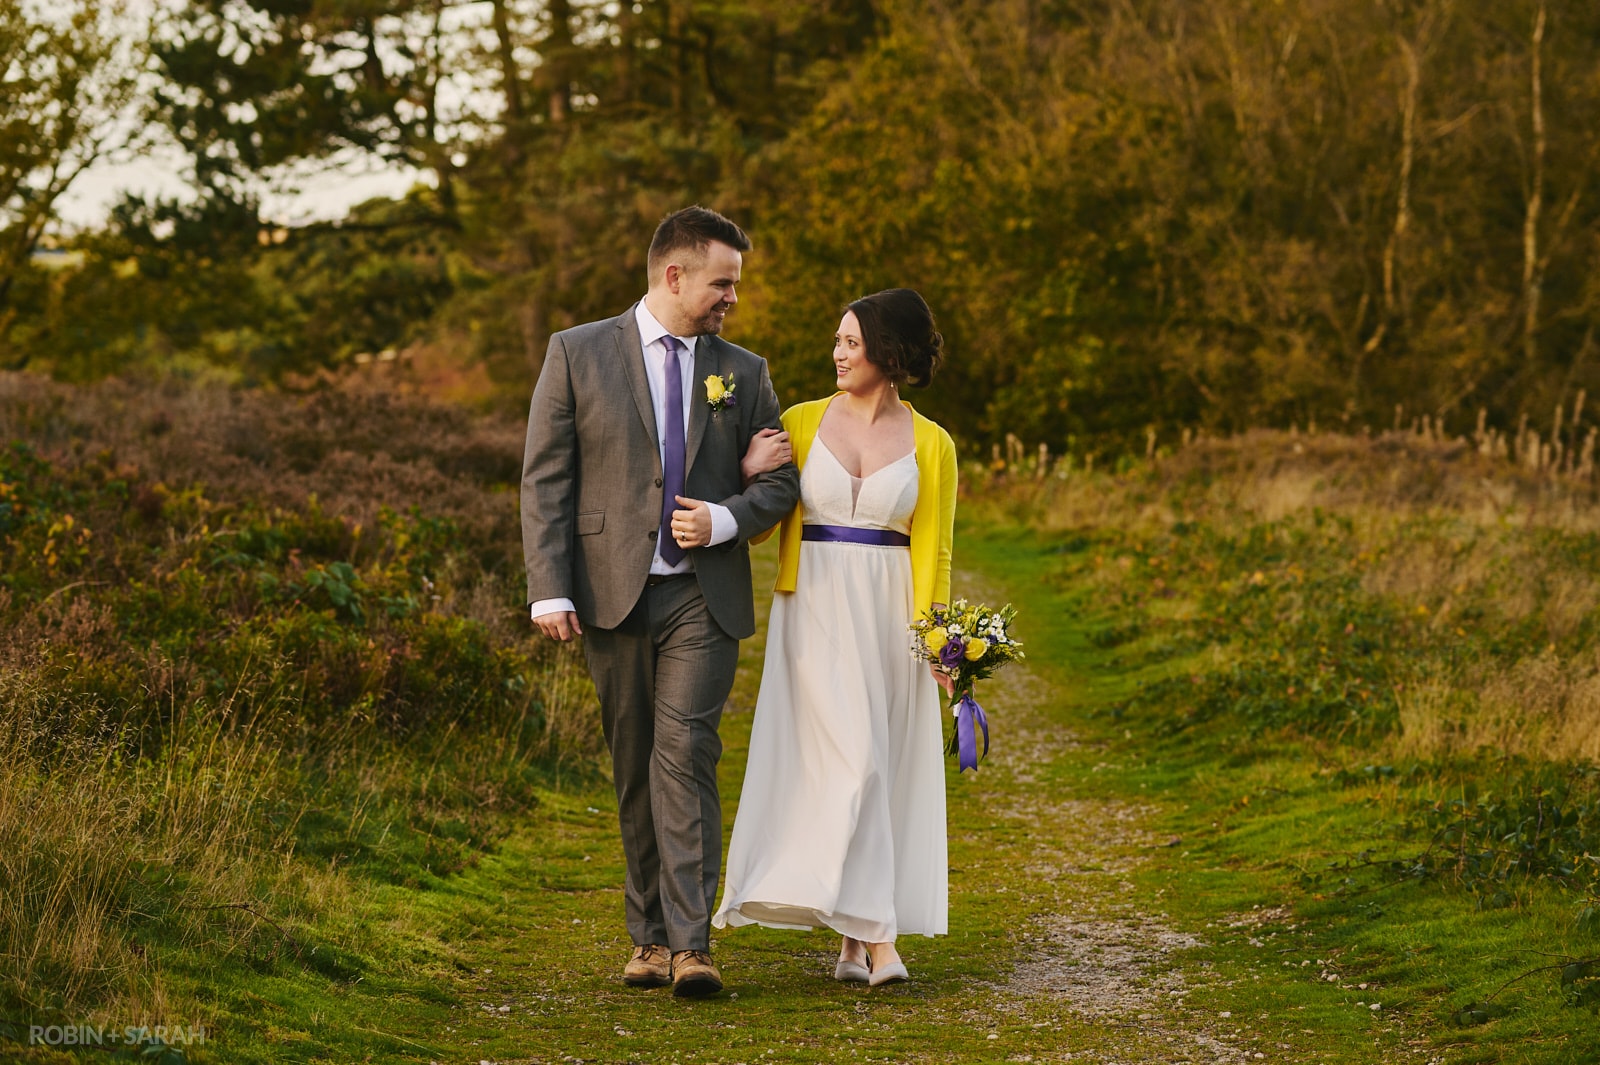 Bride in long dress with yellow cardigan and purple details walk together